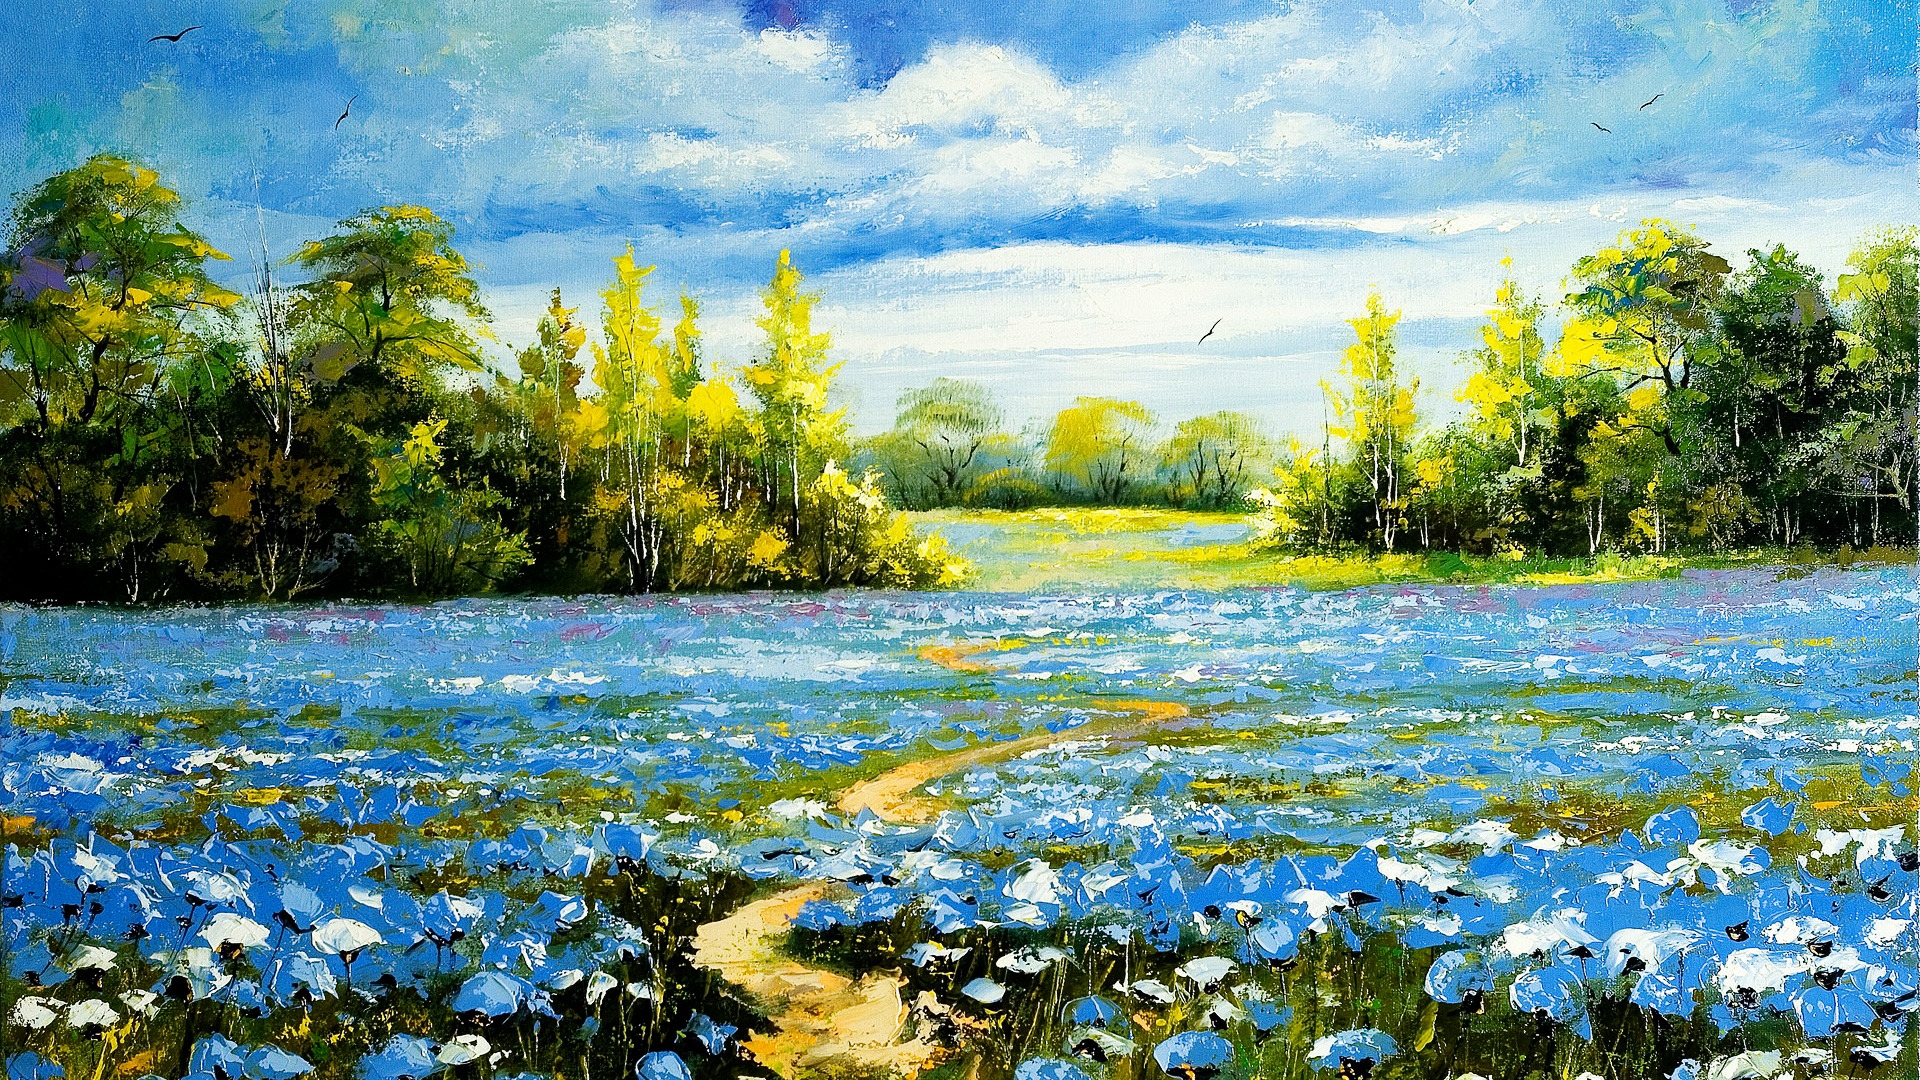 Landscape Oil Painting for 1920 x 1080 HDTV 1080p resolution